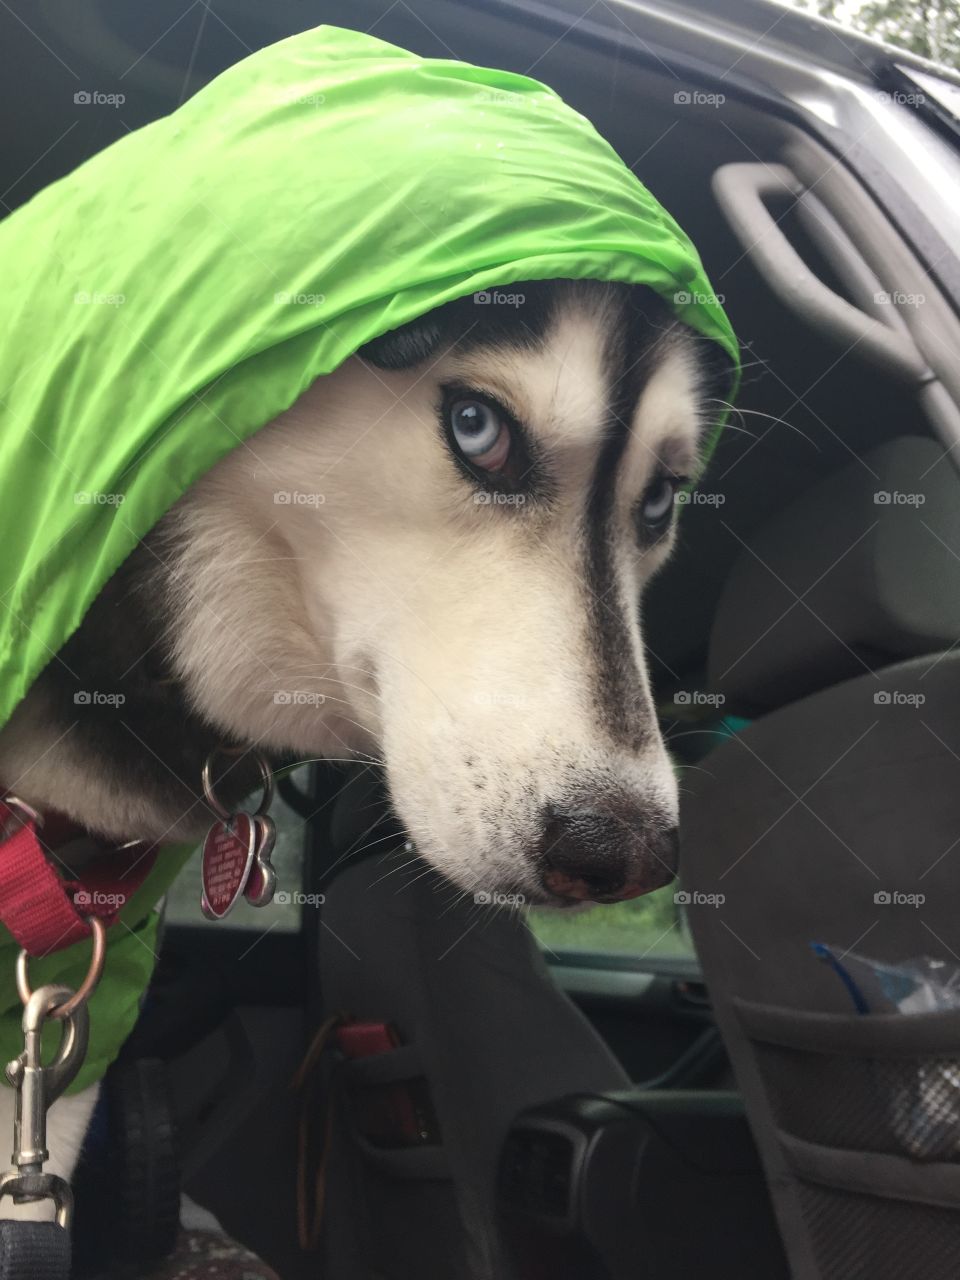 I want to walk, but not with this raincoat!